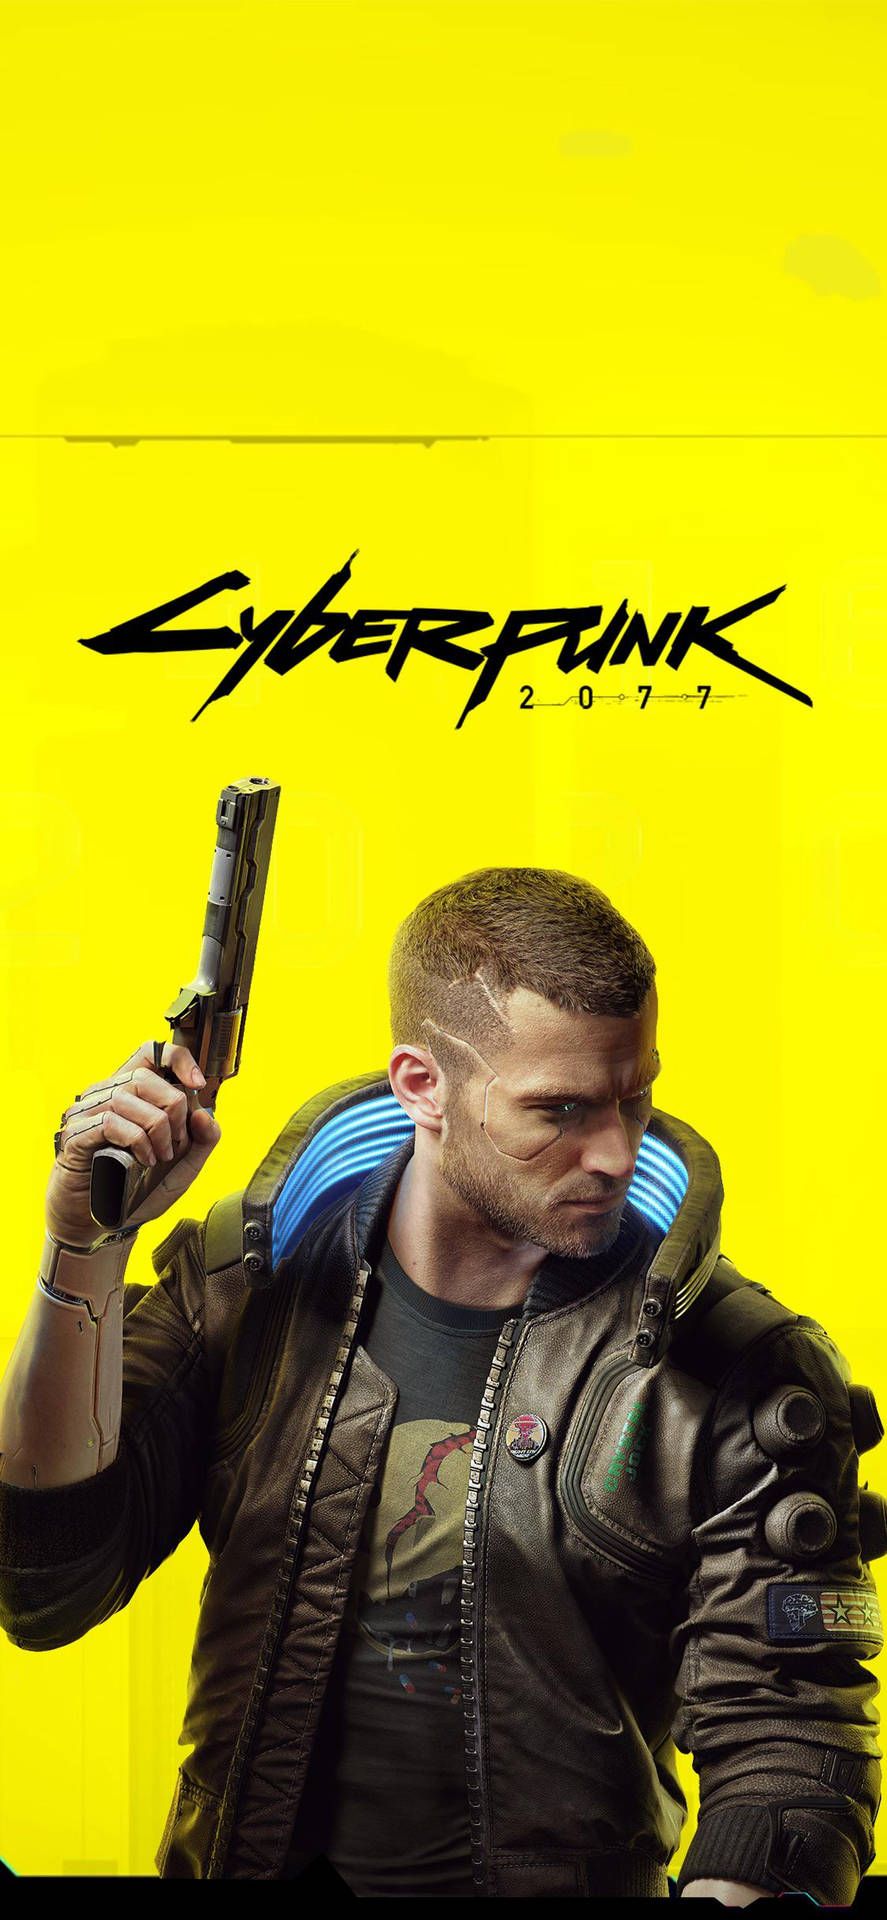 Cyberpunk 2077 wallpaper with the game's main character. - Cyberpunk 2077